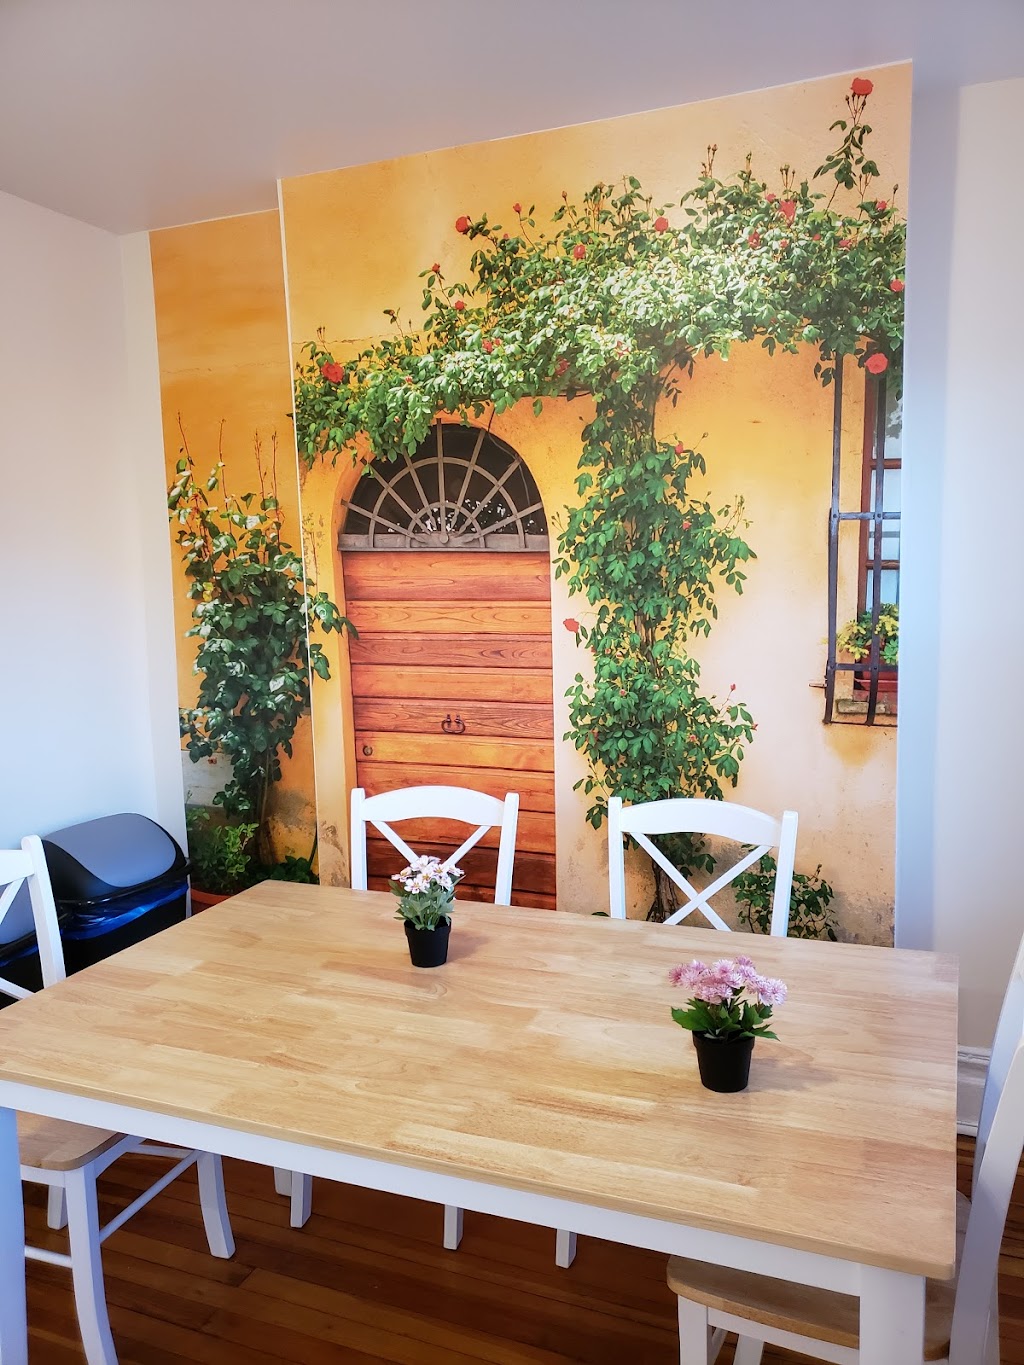 SharedEasy | Long Island City Coliving | 29-07 35th Ave, Queens, NY 11106 | Phone: (929) 575-5792